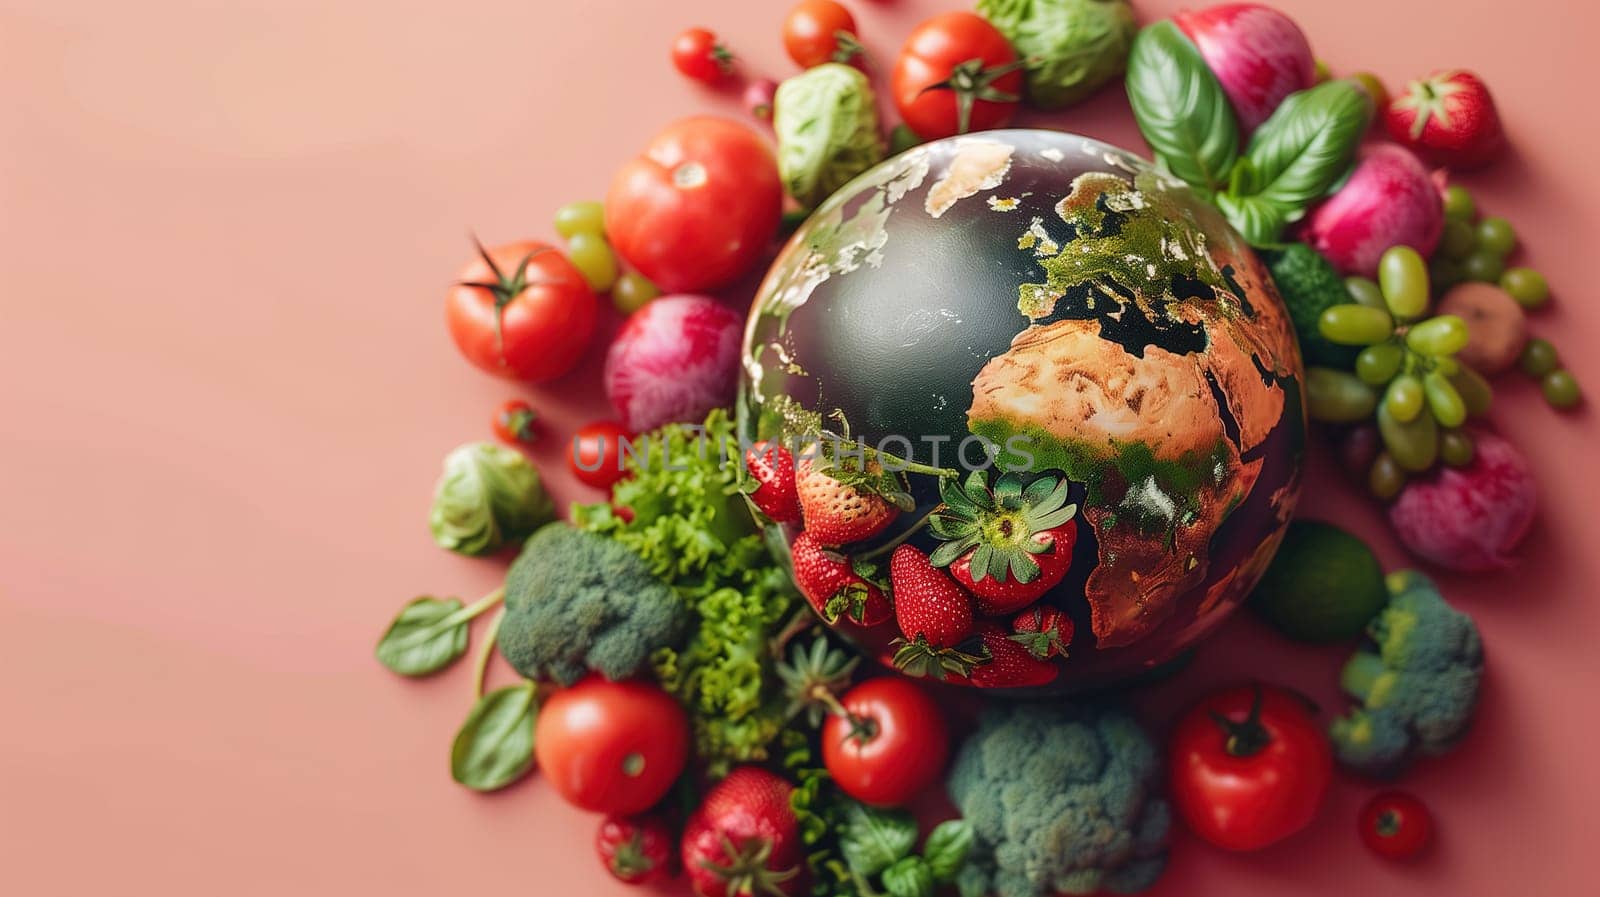 Globe Surrounded by Fruits and Vegetables on Pink Background by TRMK